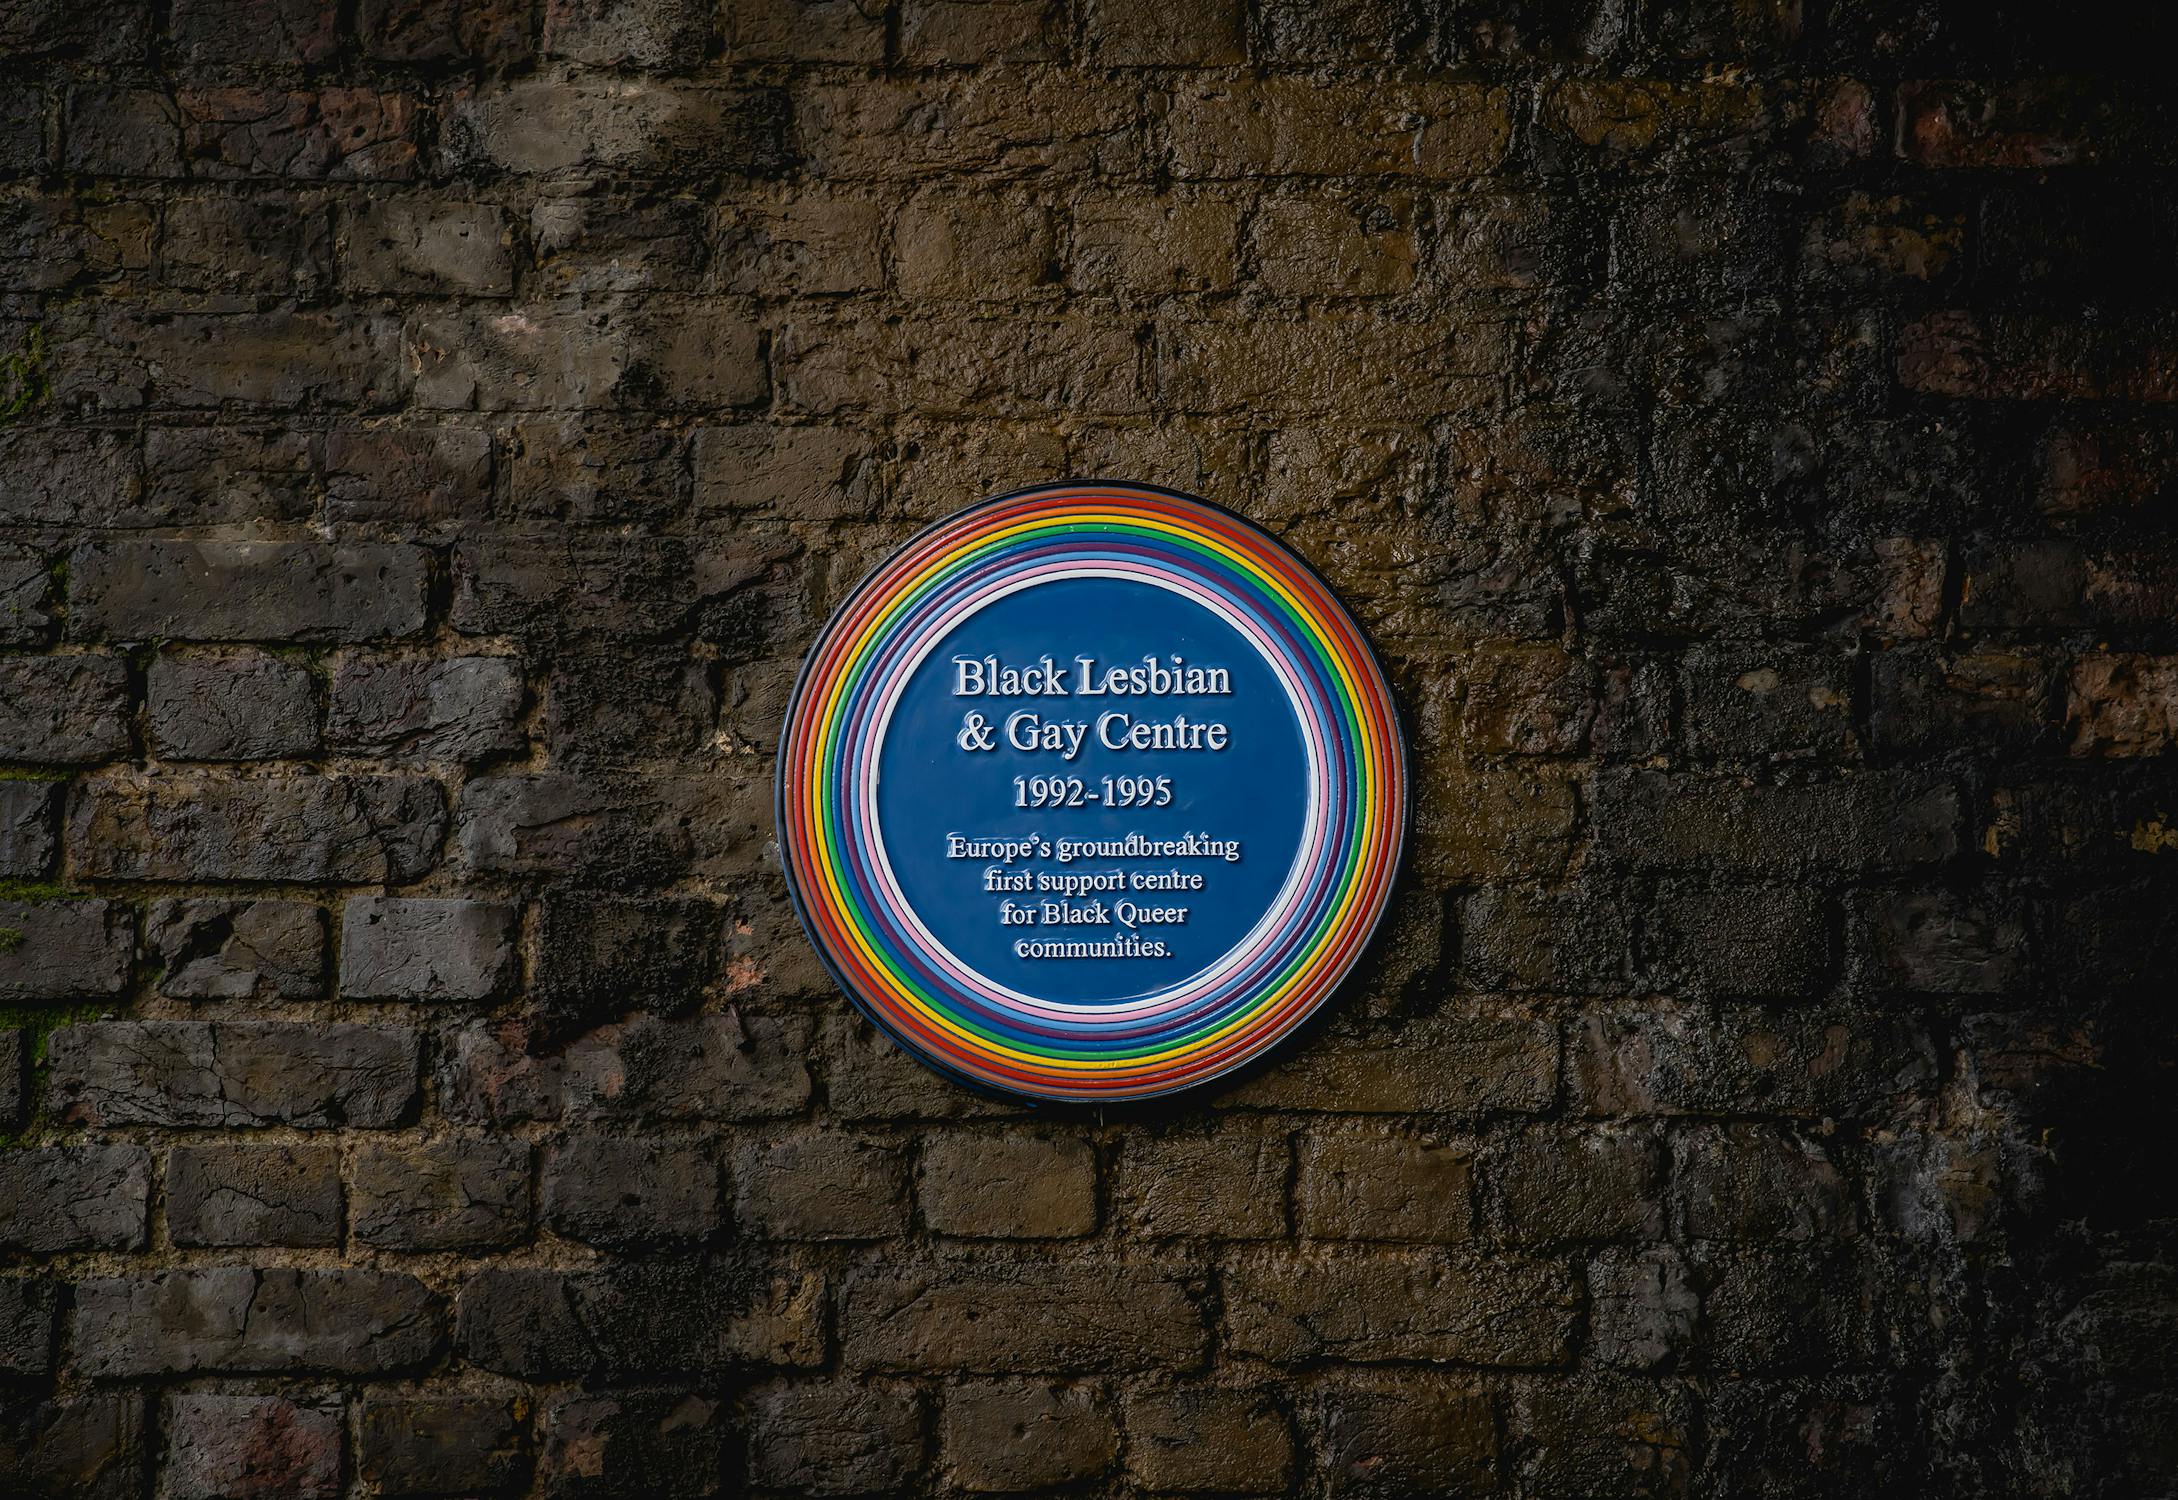 A circular wall plaque with a rainbow trim mounted on a brick wall.